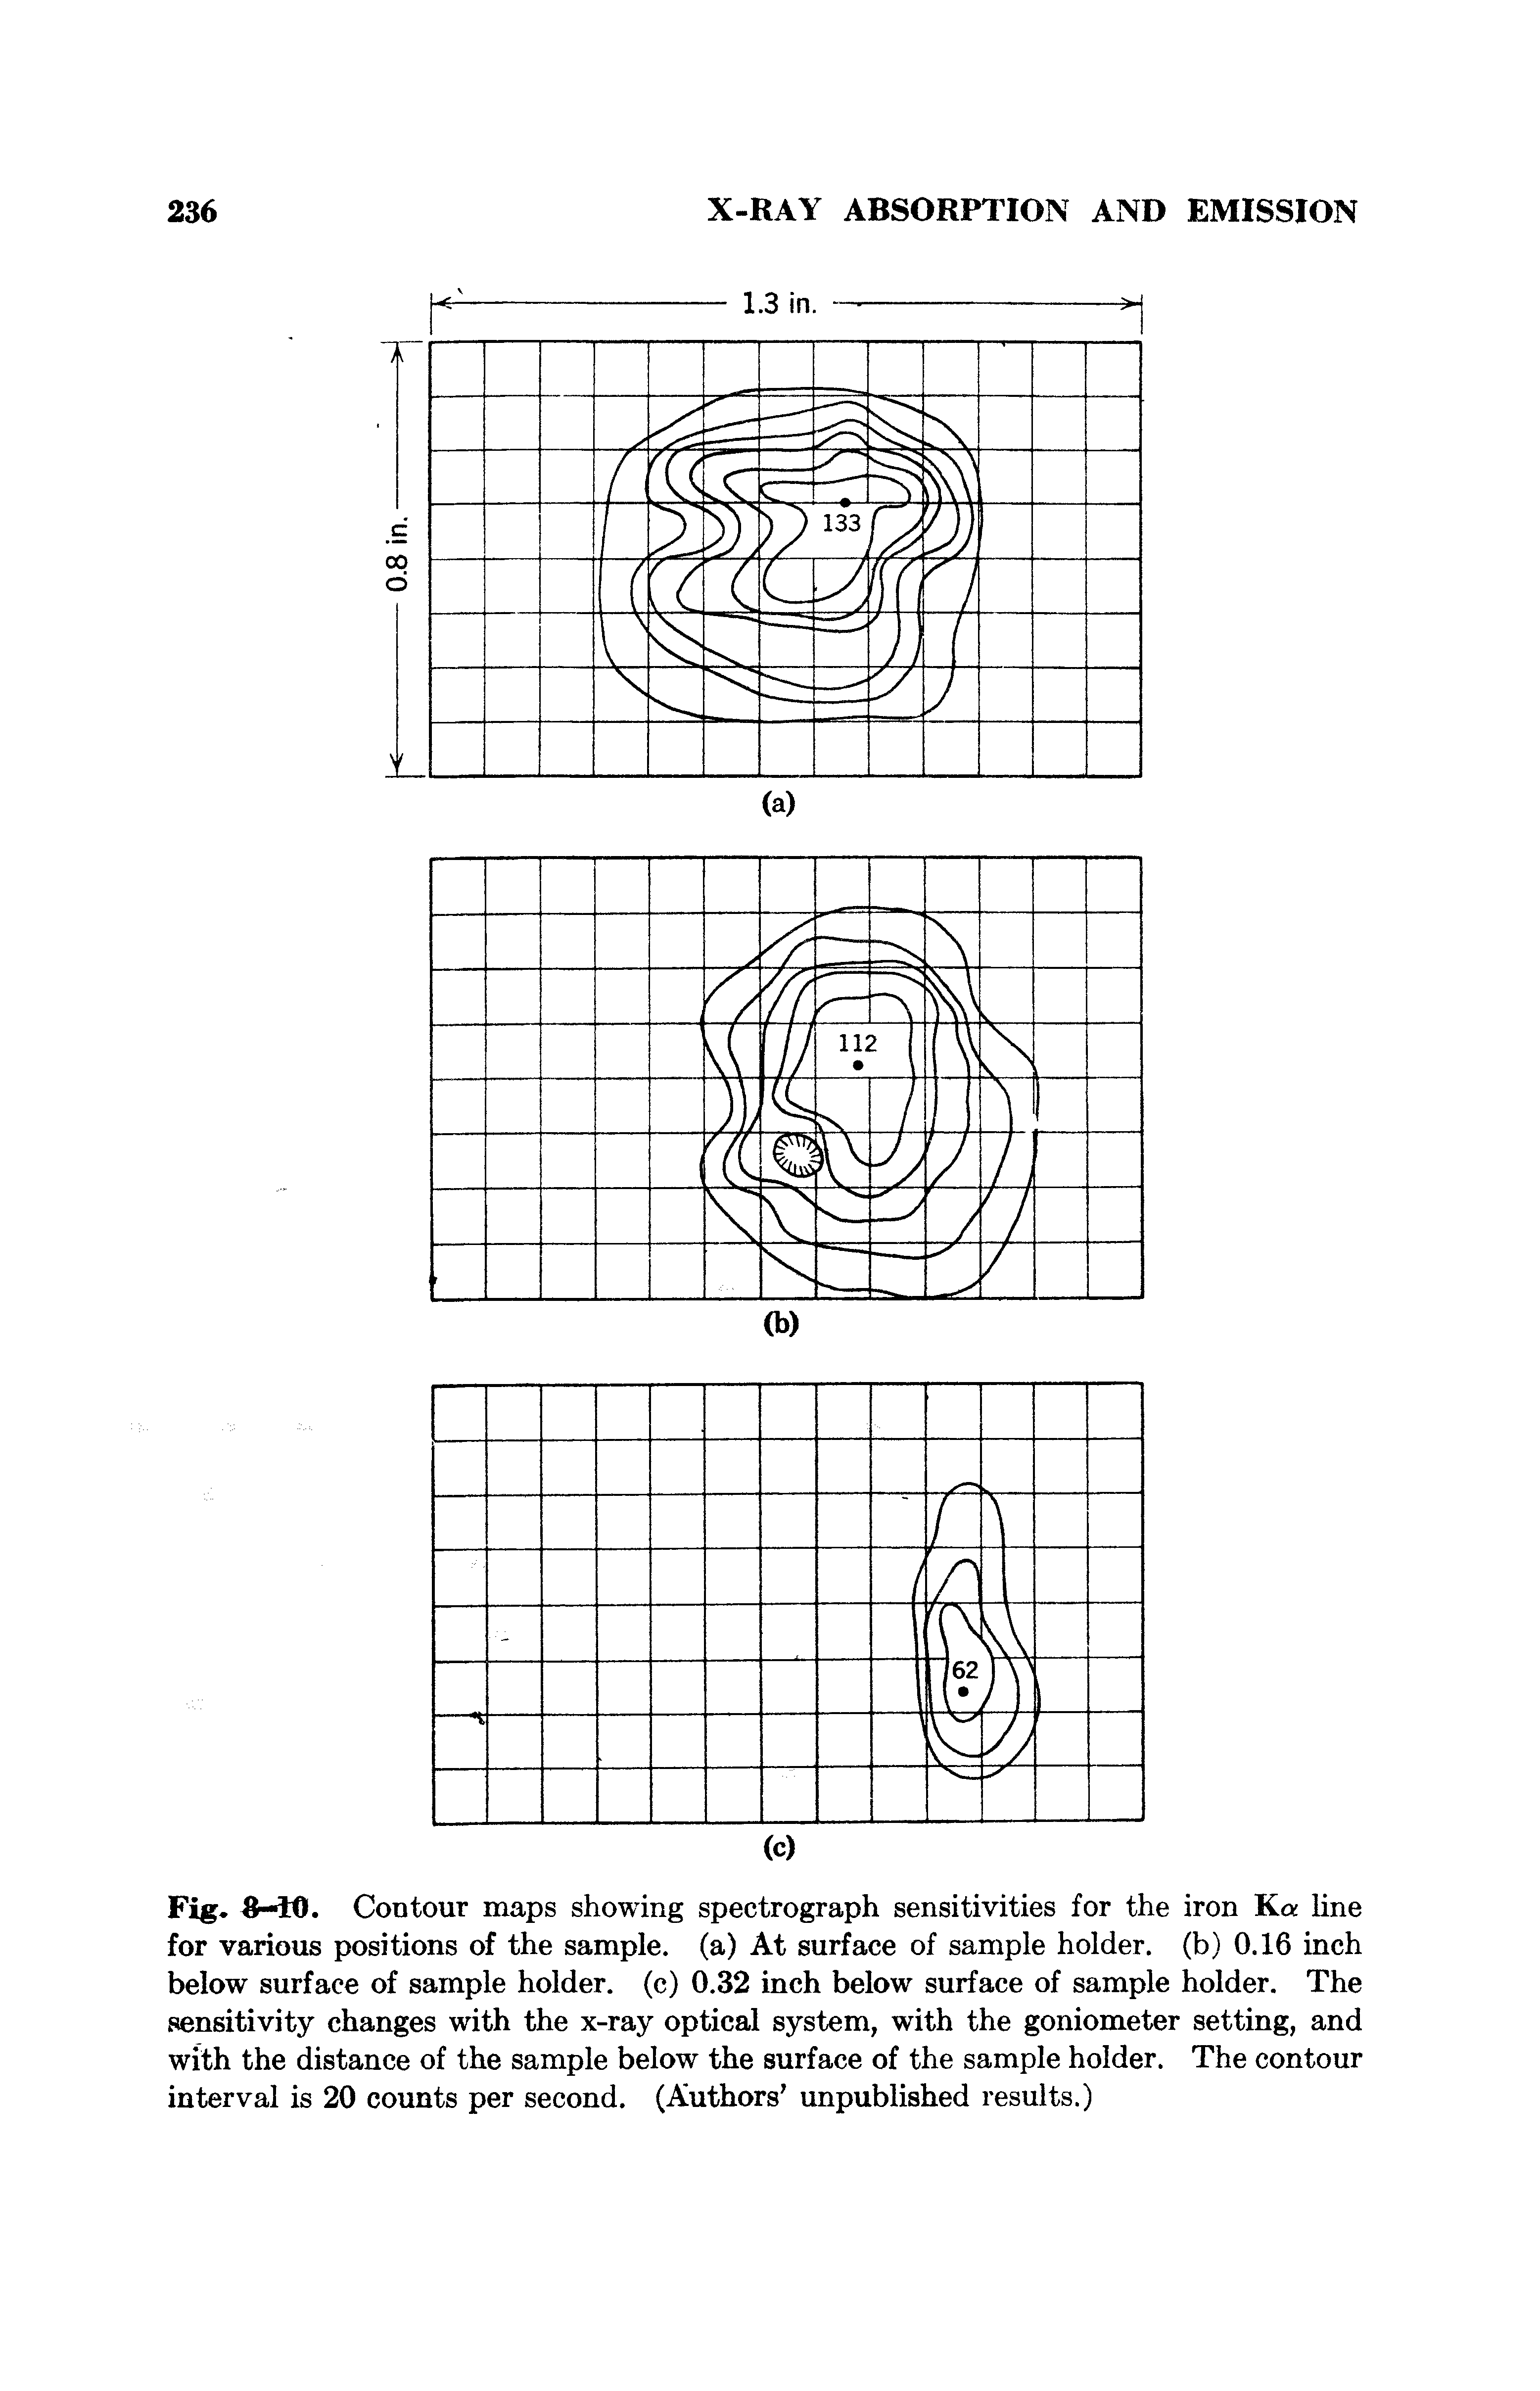 Fig. 8-10. Contour maps showing spectrograph sensitivities for the iron Ka line for various positions of the sample, (a) At surface of sample holder, (b) 0.16 inch below surface of sample holder, (c) 0.32 inch below surface of sample holder. The sensitivity changes with the x-ray optical system, with the goniometer setting, and with the distance of the sample below the surface of the sample holder. The contour interval is 20 counts per second. (Authors unpublished results.)...